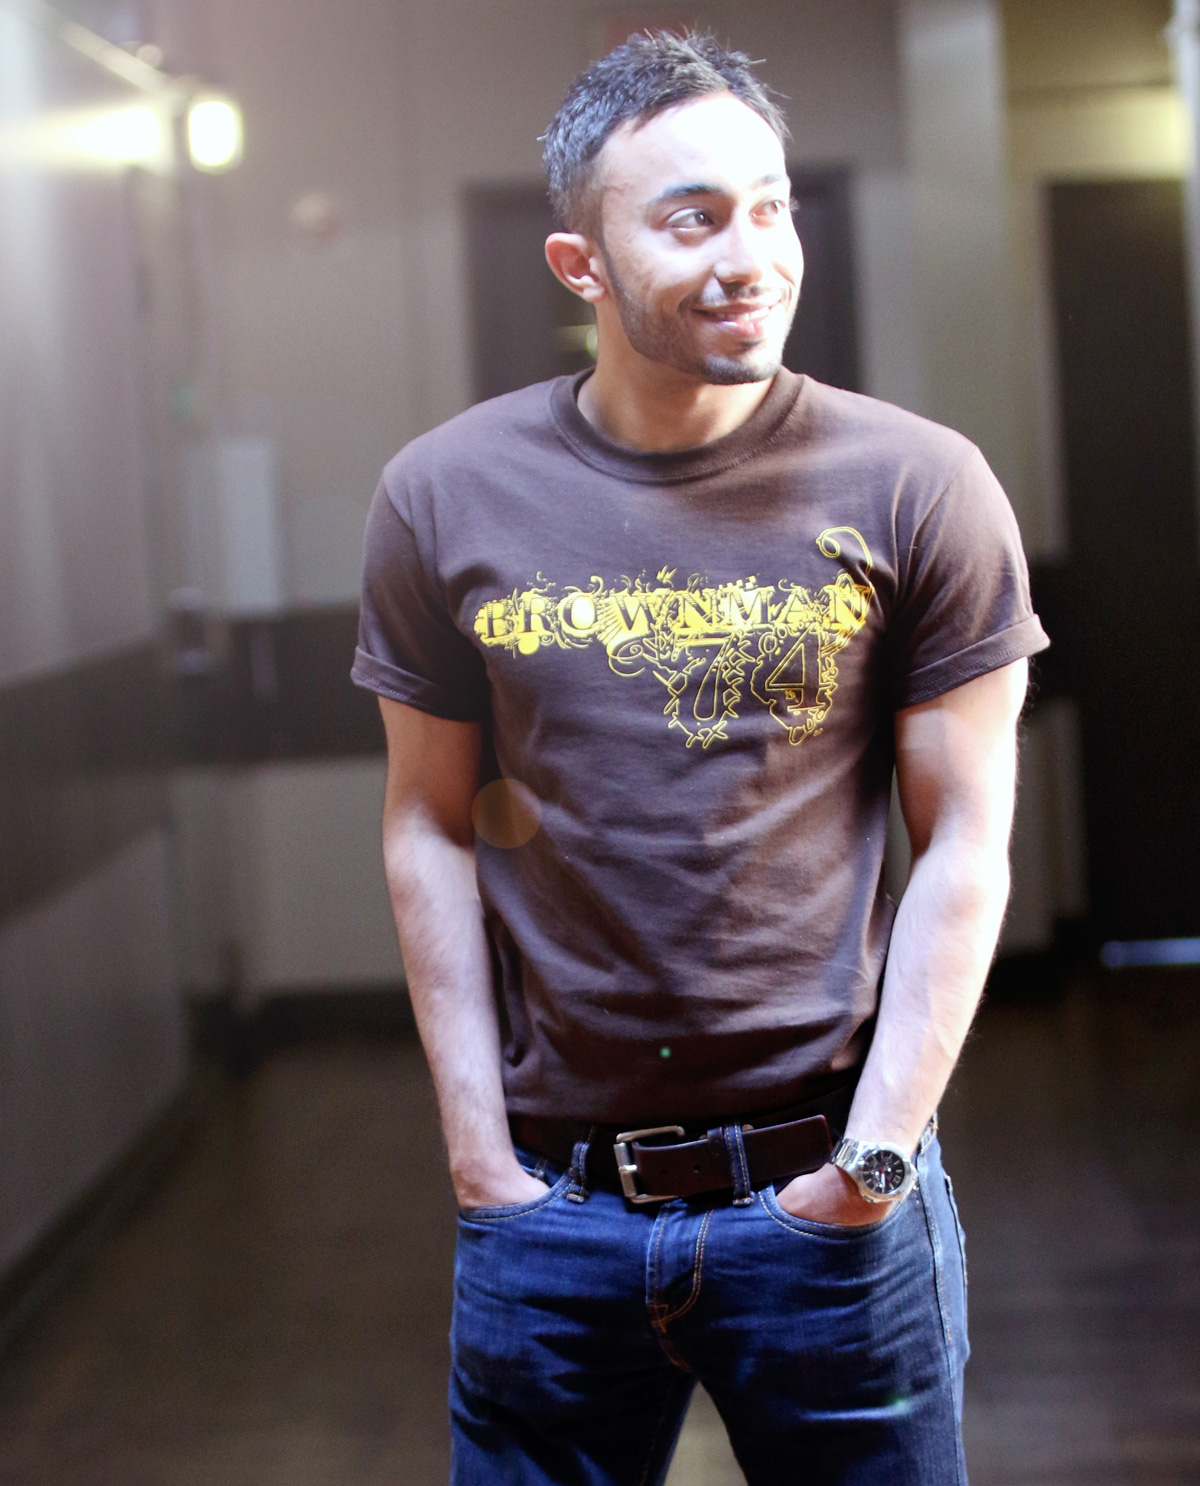 brownman74 t.shirt worn by South Asian male model.